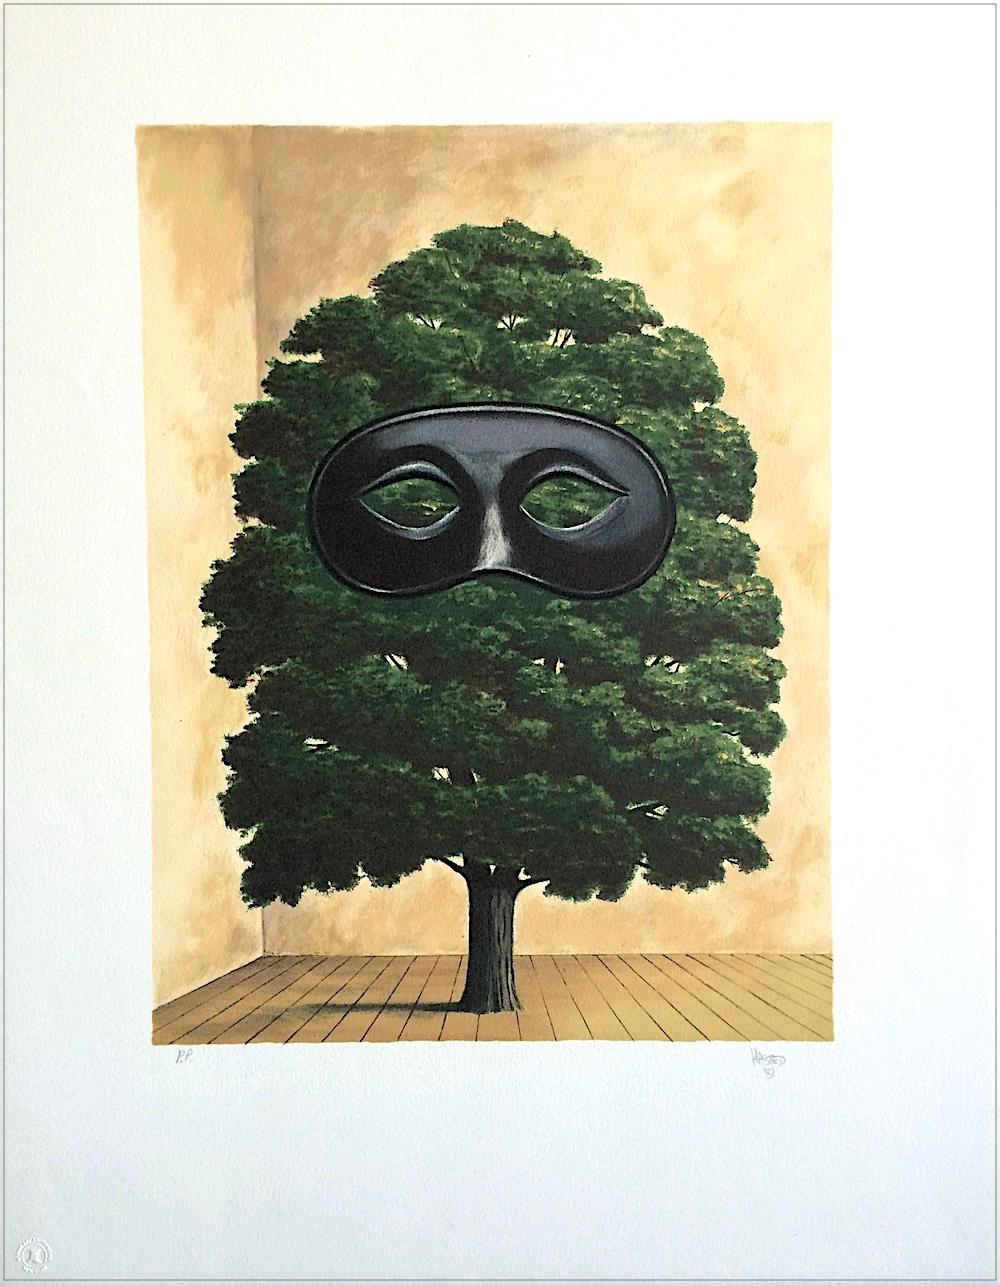 Michael Hasted Portrait Print - THE BIG PARADE Hand Drawn Lithograph, Surrealist Tree, Black Mask